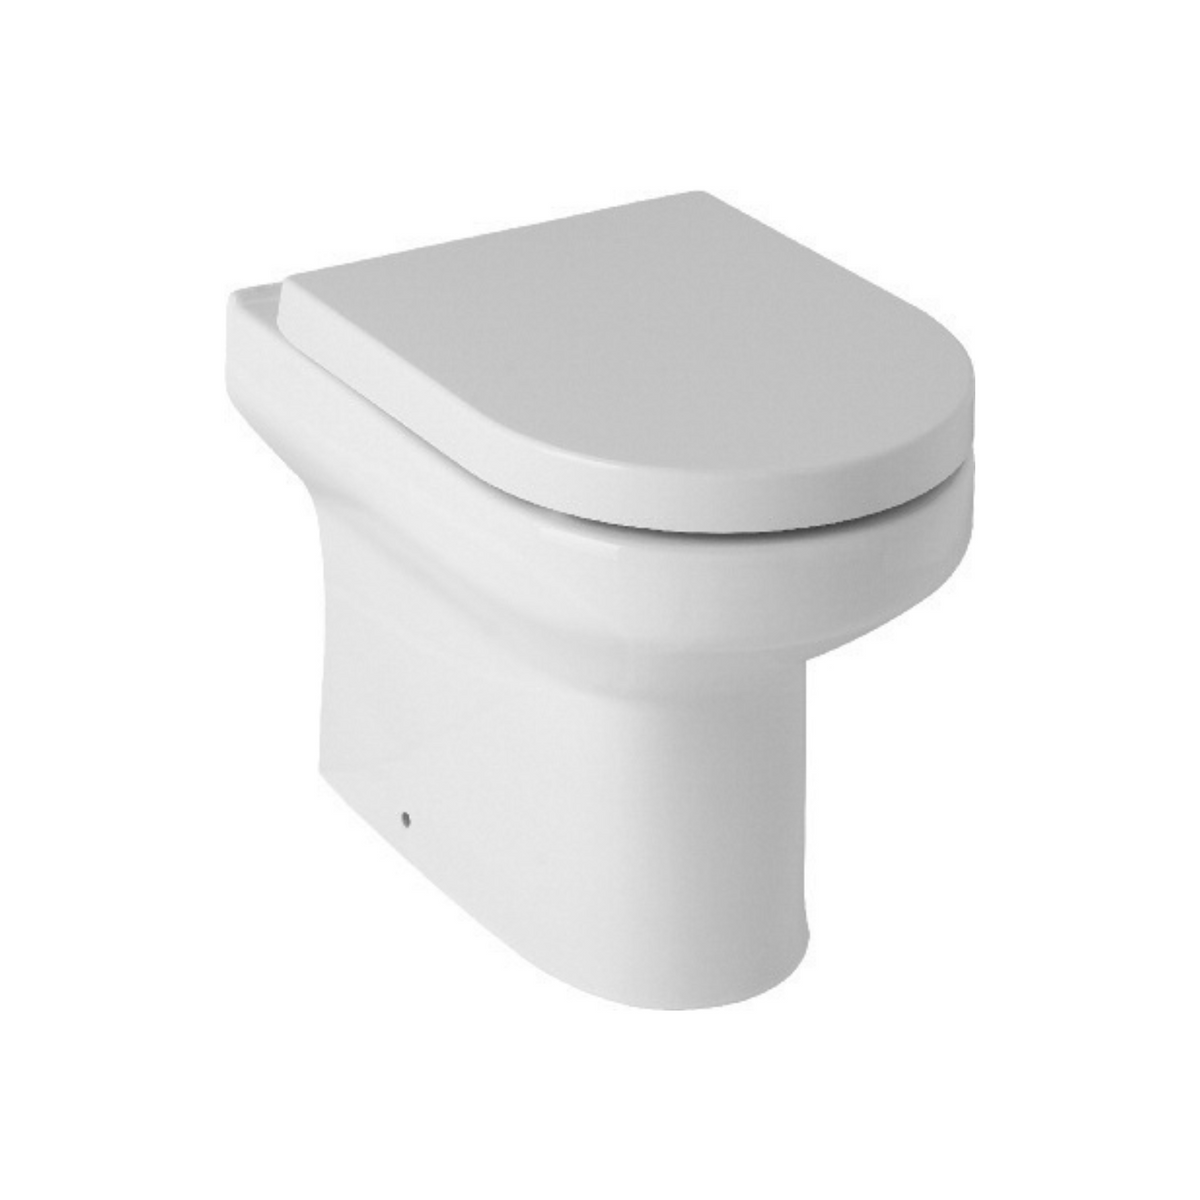 Stylish Toilets & Basins: B&Q's Close Coupled Options for Cloakrooms